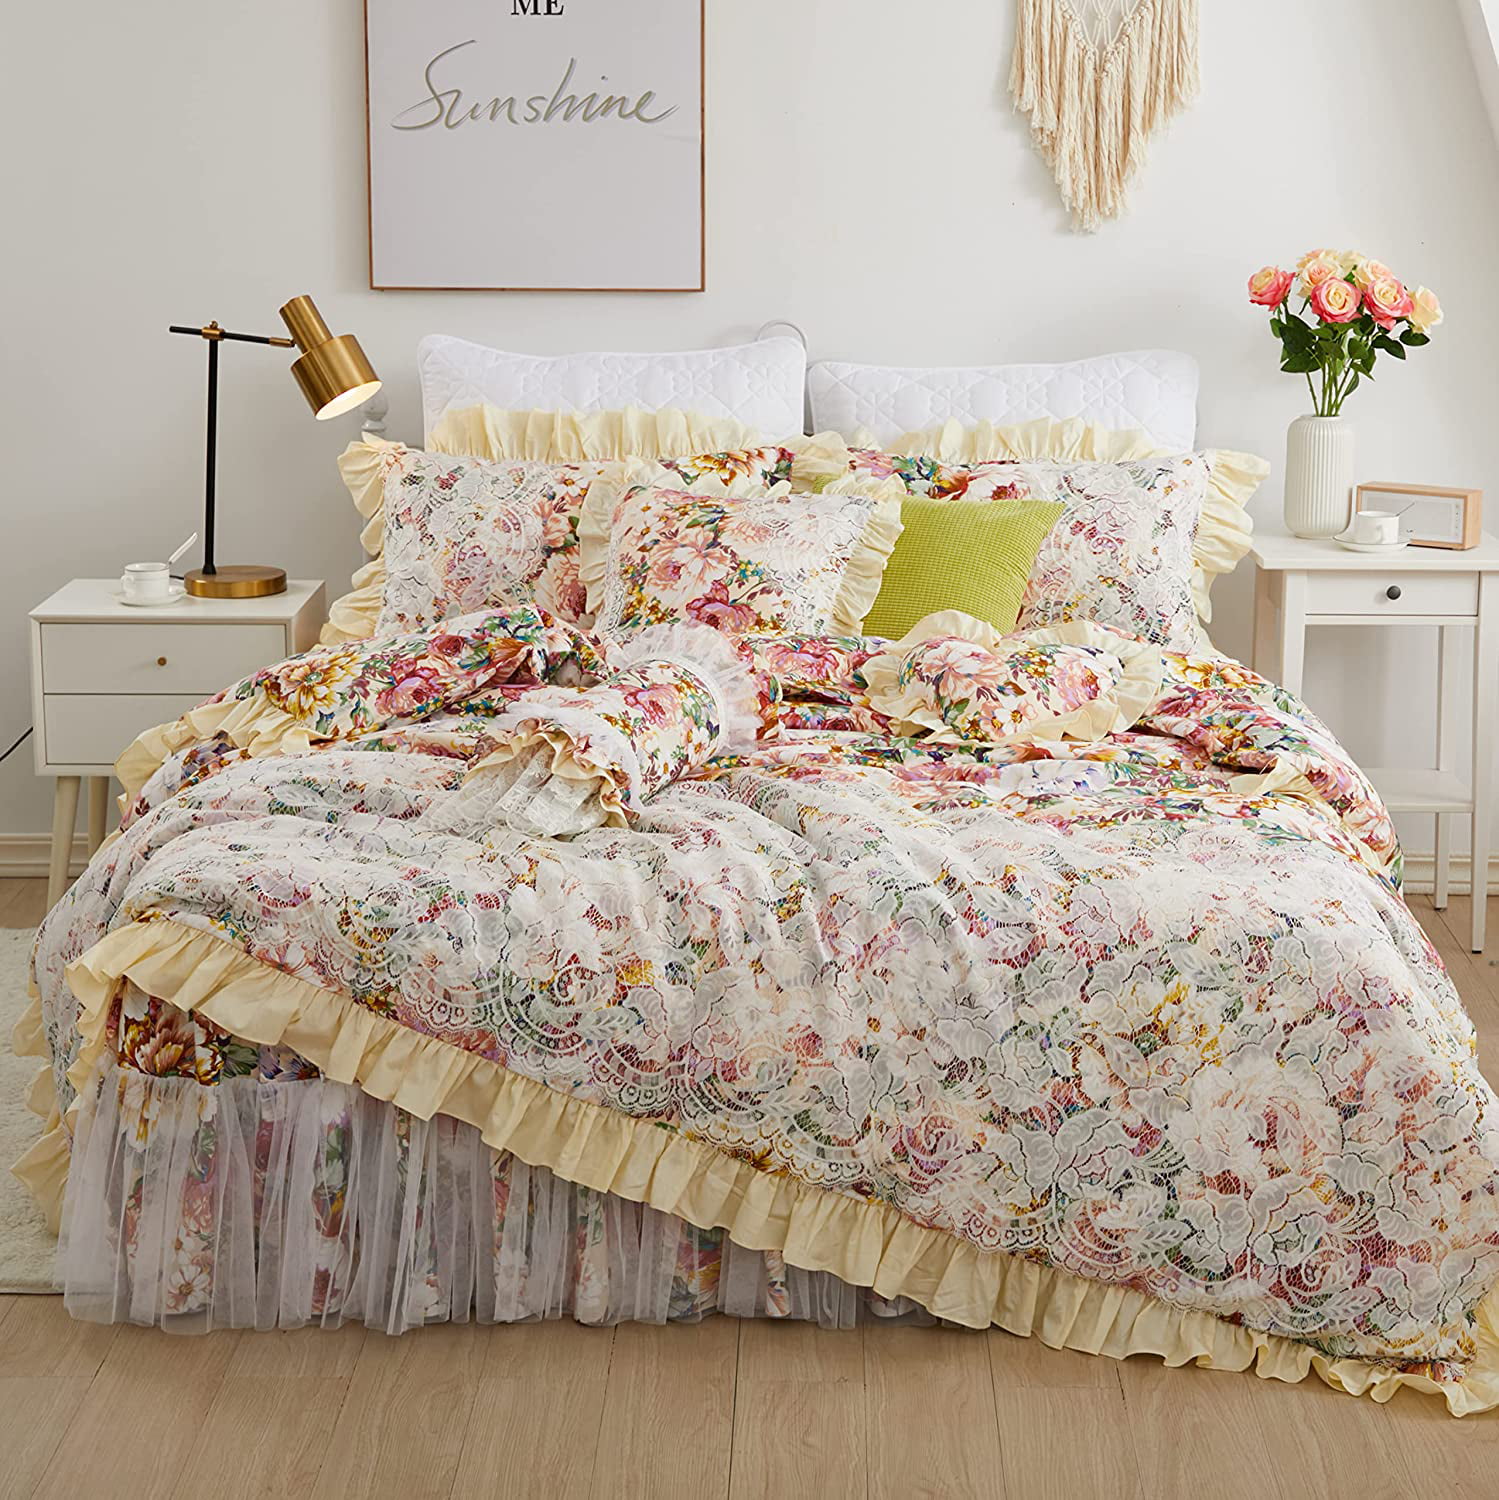 Vintage Style Floral Ruffle Duvet Cover Bed Sheet Soft Bedding Sets Queen 4Pcs 